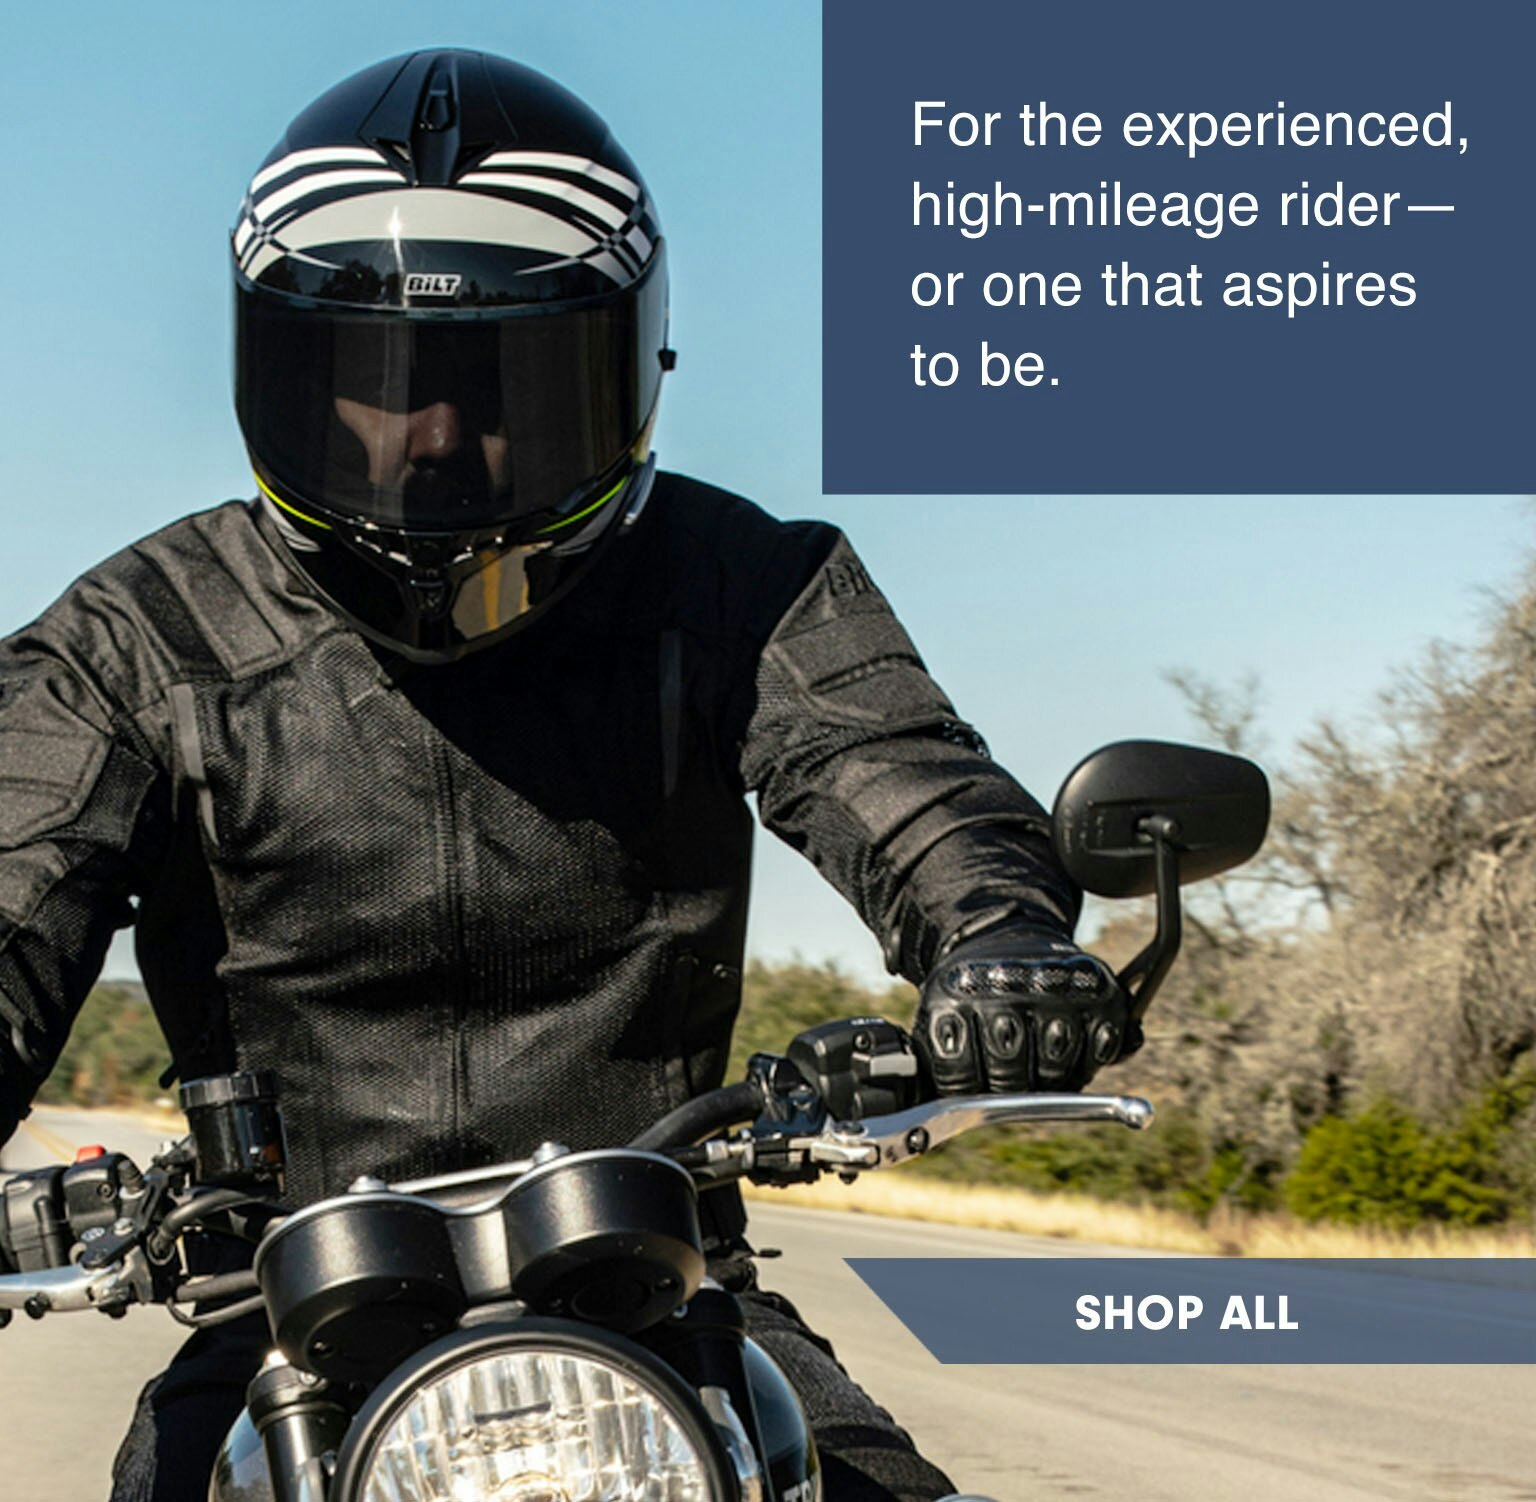 BILT Motorcycle Gear and Apparel